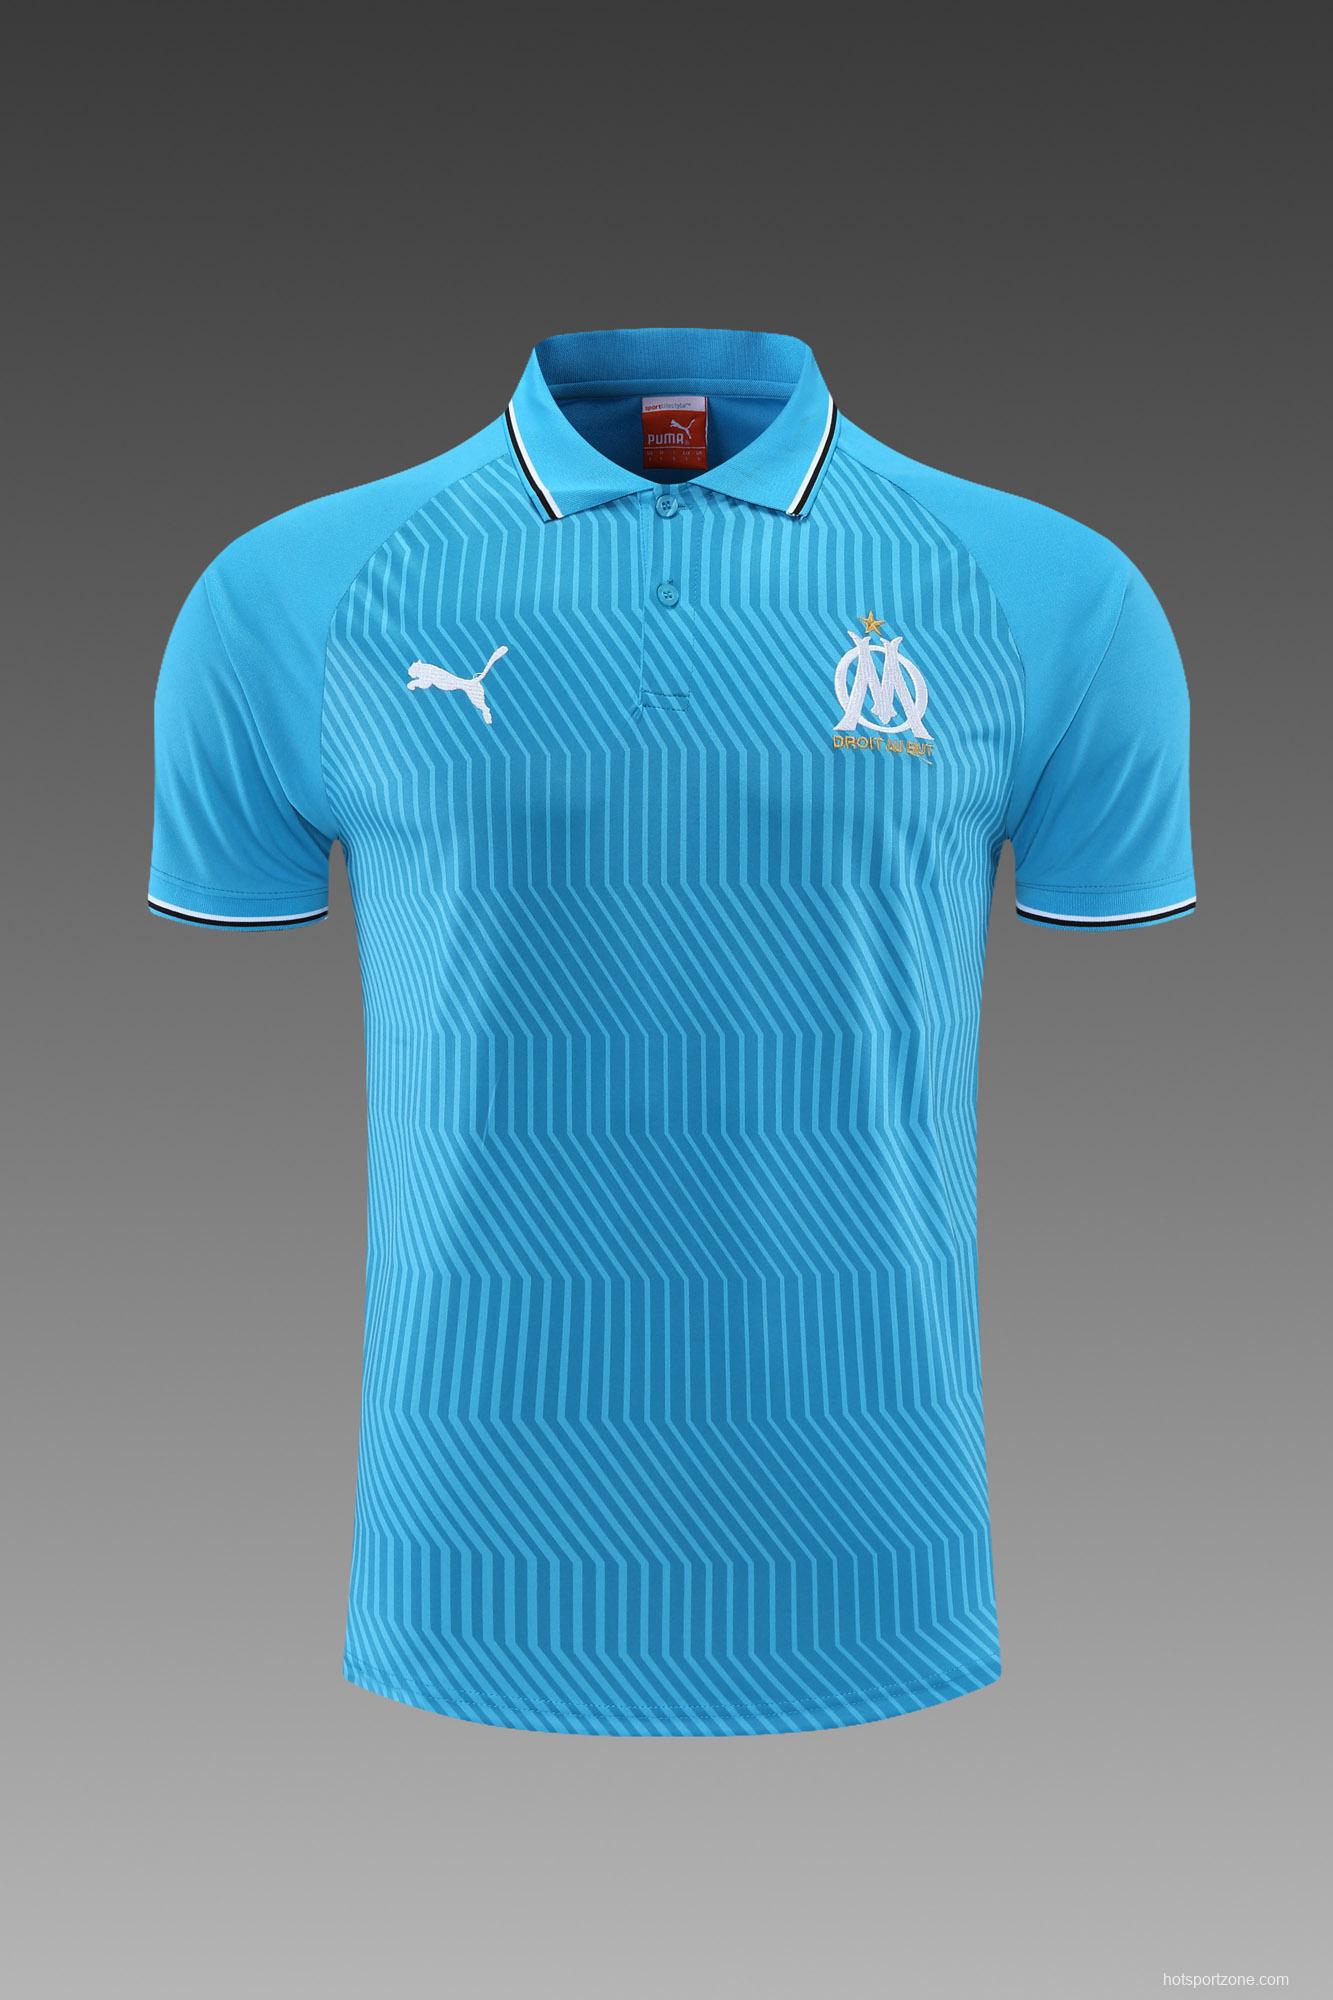 Olympique de Marseille POLO kit Royal Blue (not supported to be sold separately)